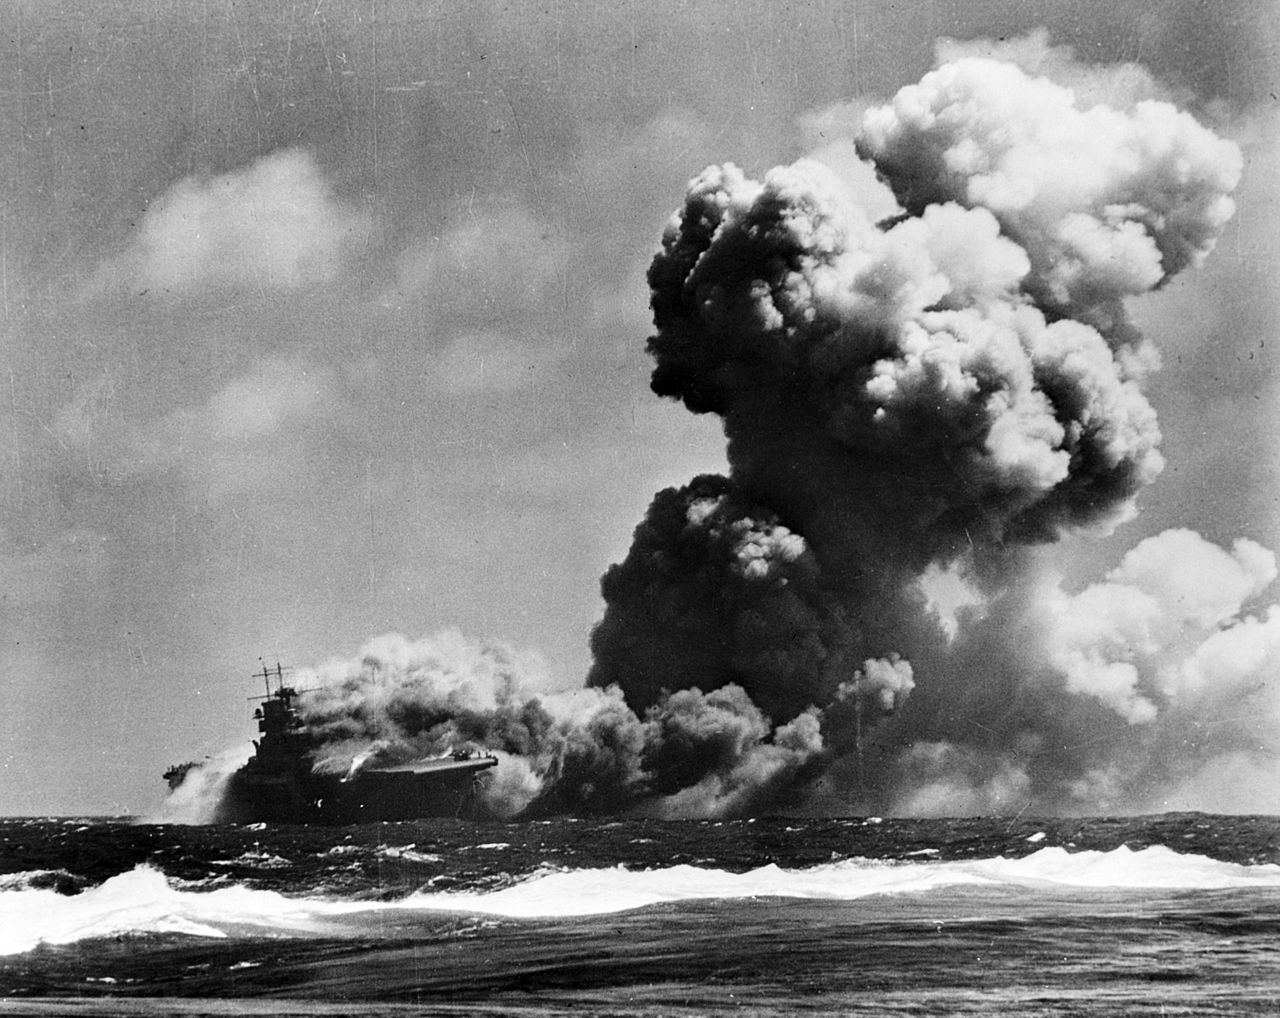 U.S. Aircraft Carrier USS Wasp (CV-7) Burning After Receiving Three Torpedo Hits From Japanese Submarine East of the Solomons, Near Guadalcanal, 15 September 1942, Library of Congress